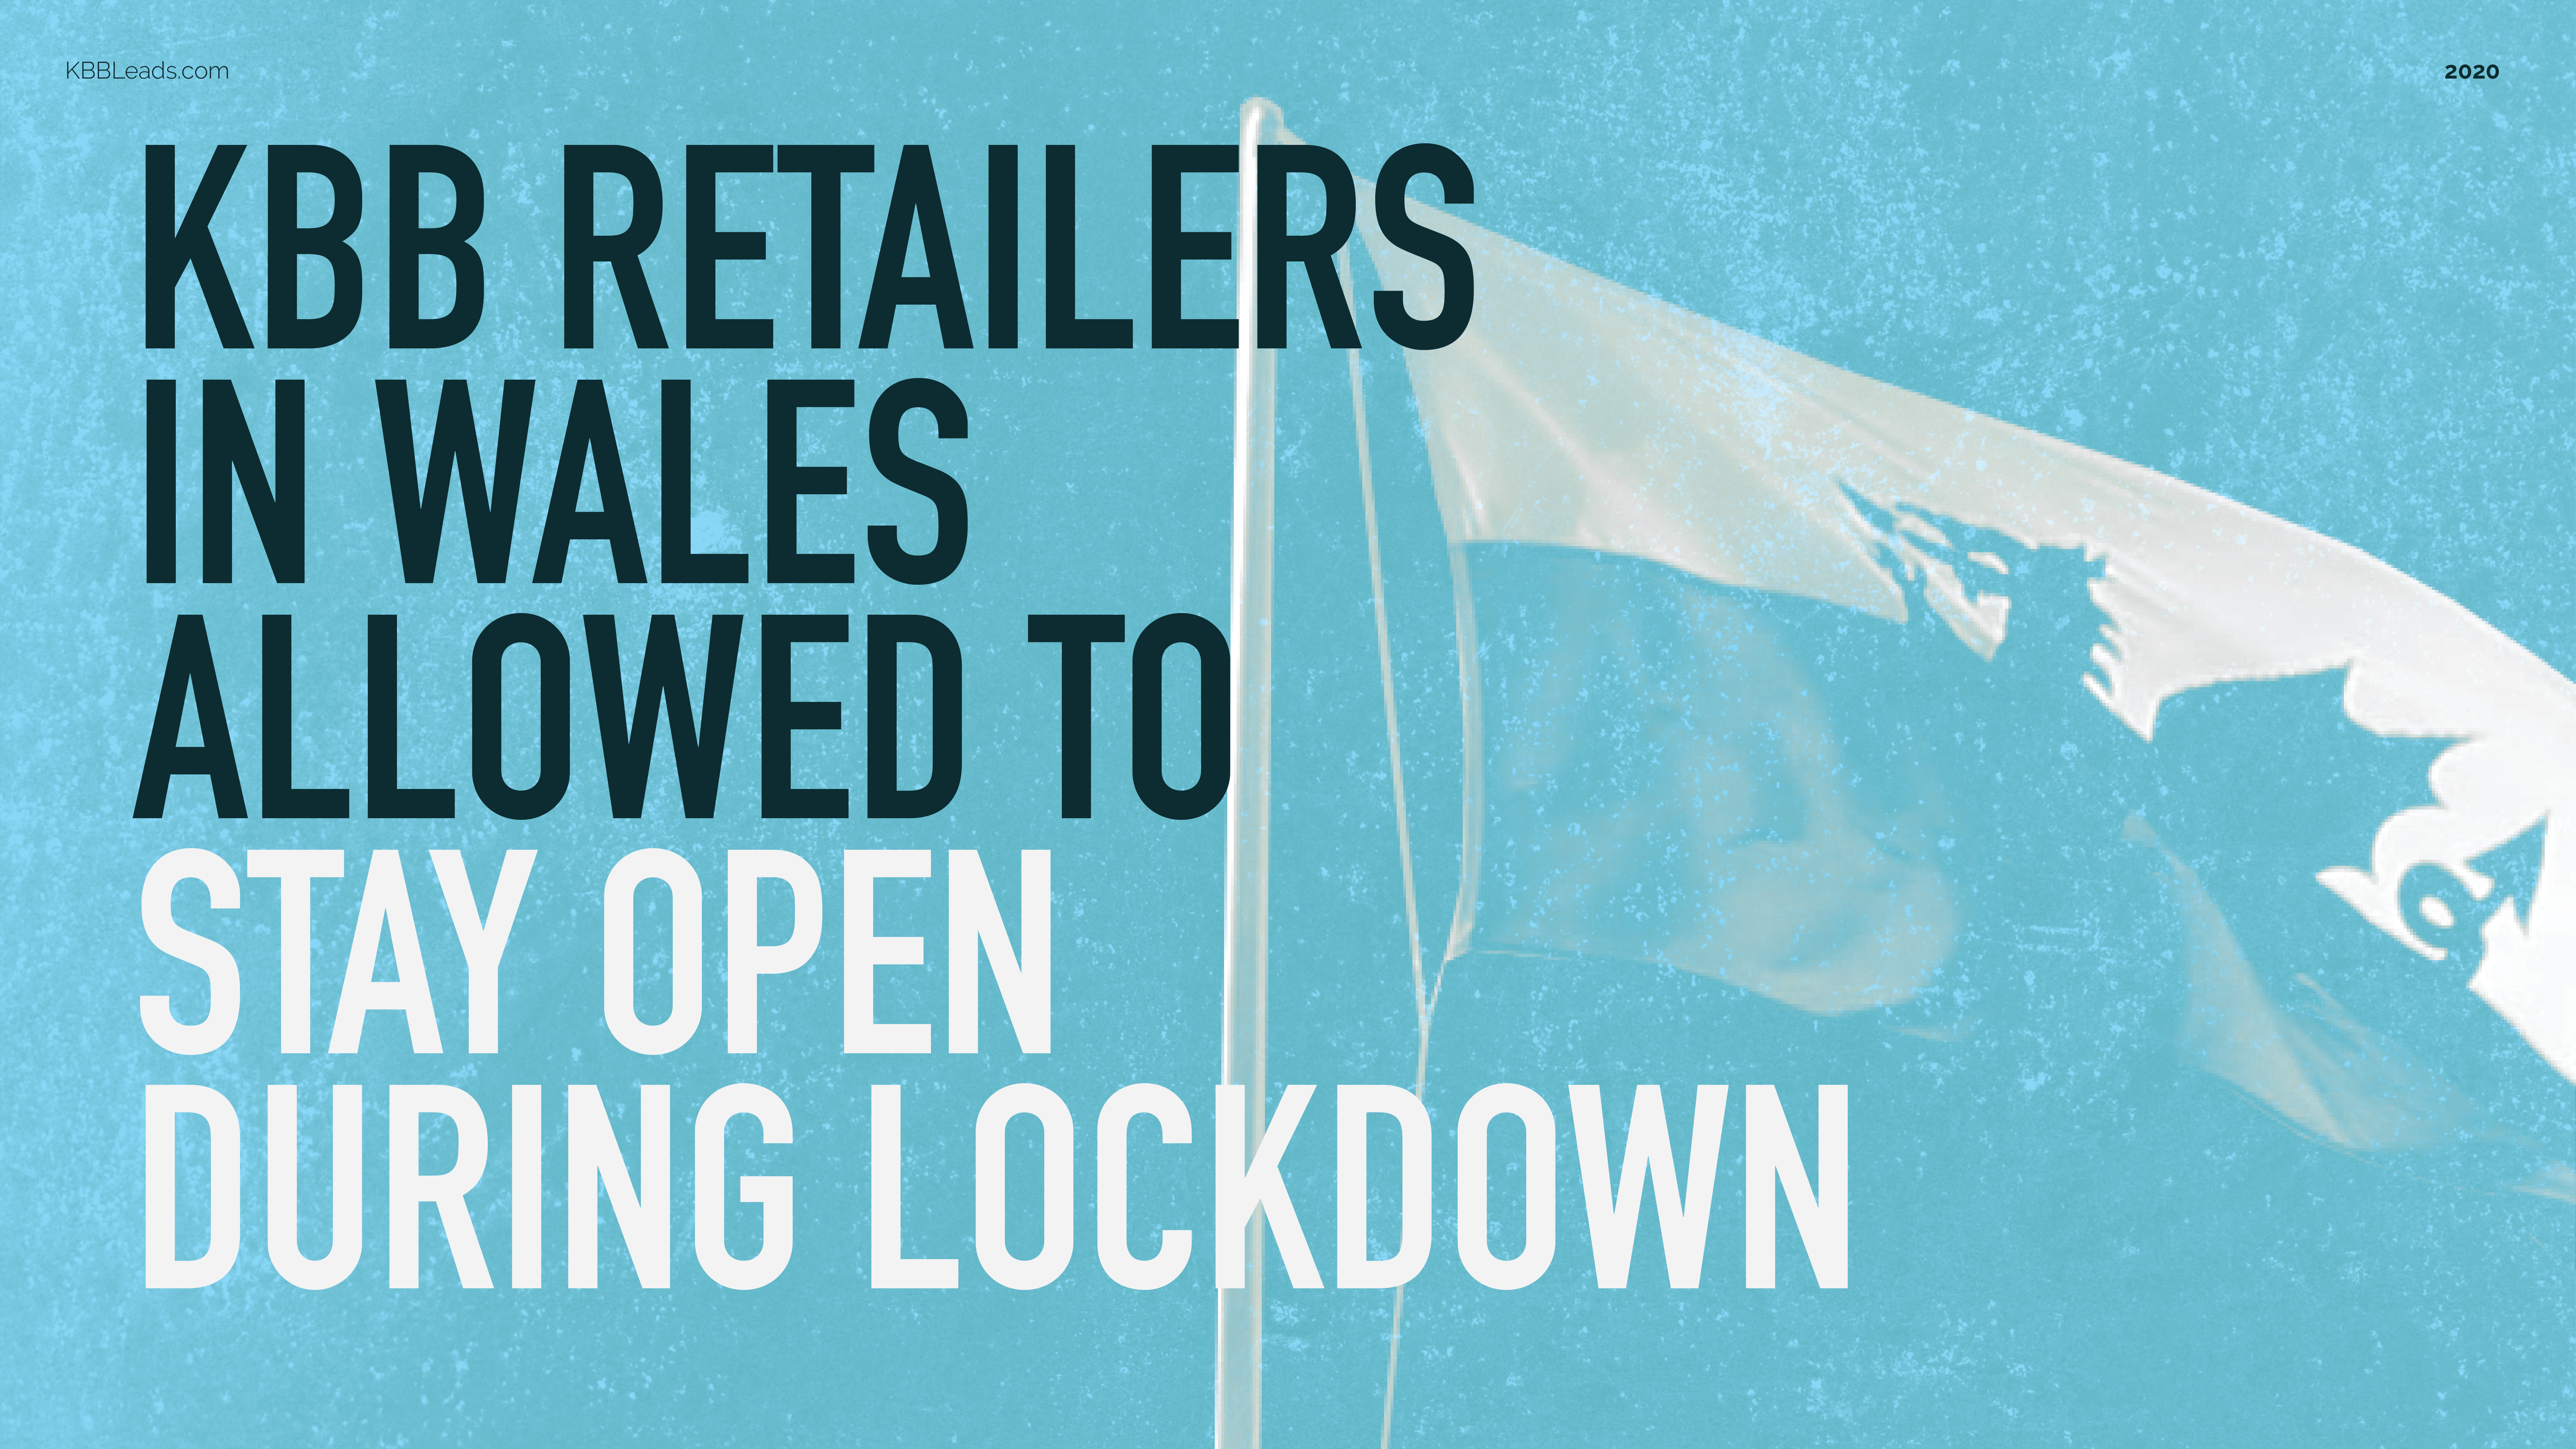 KBB retailers in Wales allowed to stay open during lockdown